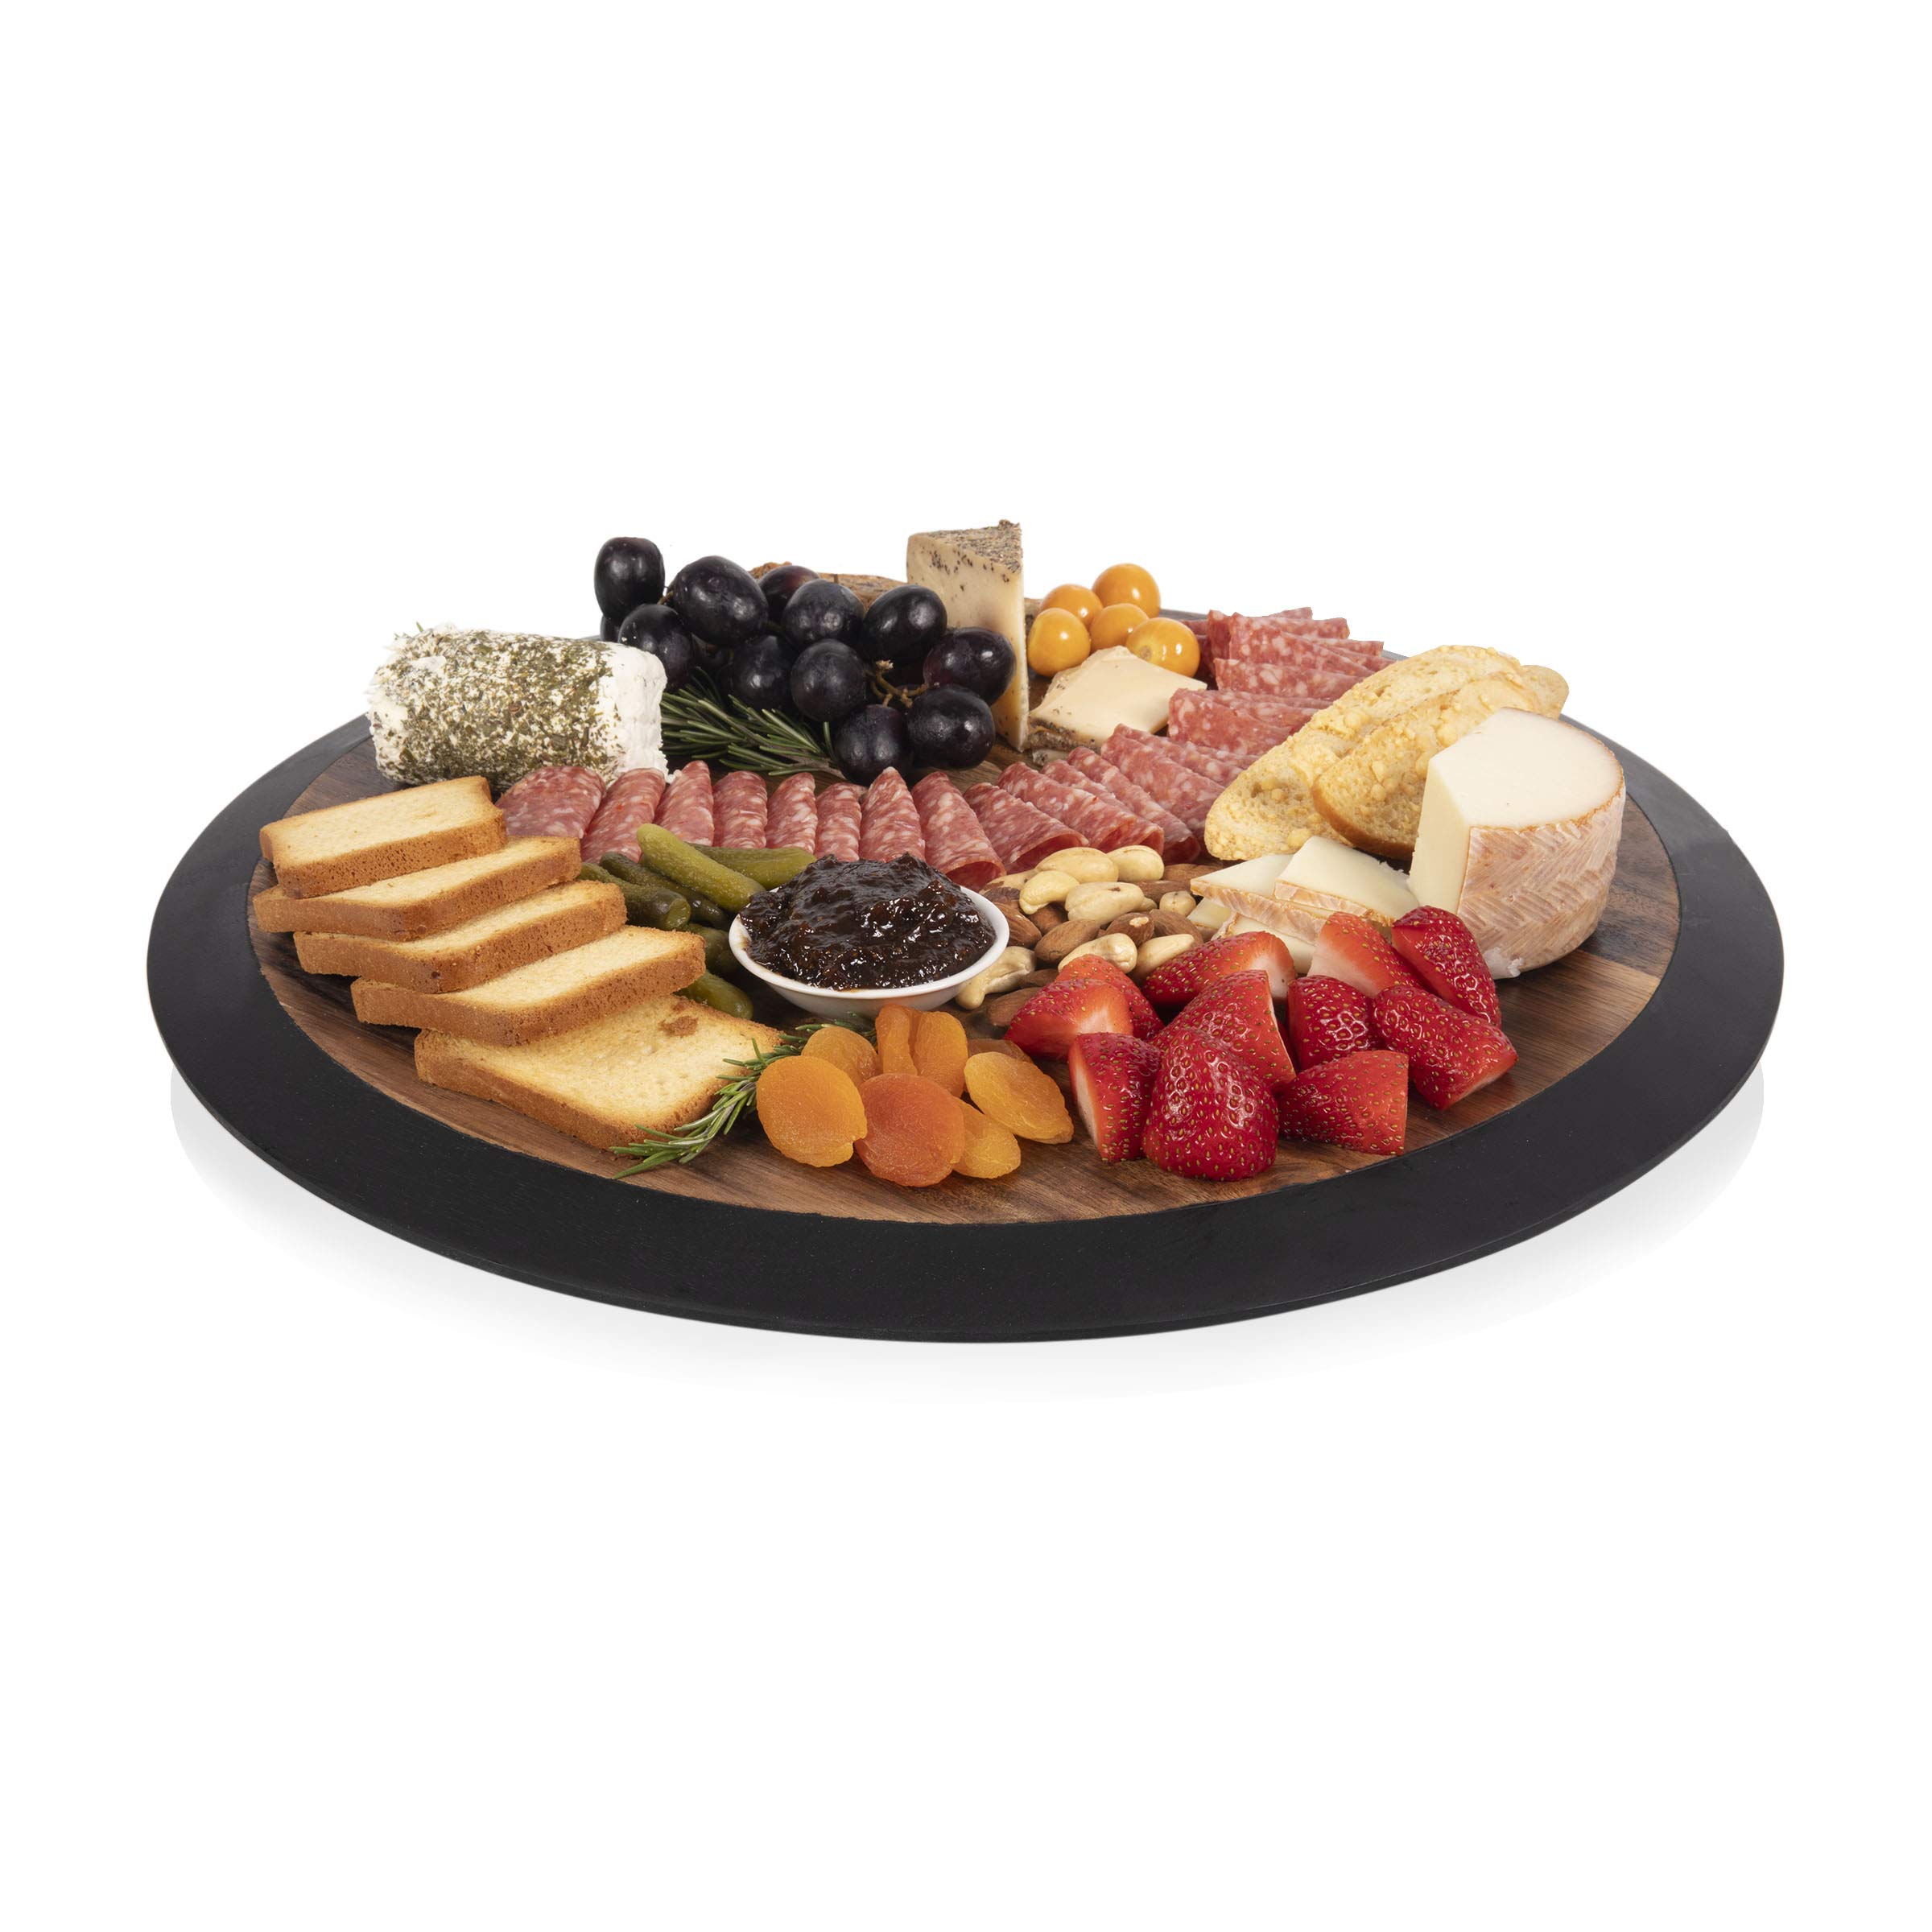 TOSCANA - a Picnic Time Brand Lazy Susan Tray Wooden Turntable Round Charcuterie Board, Cheese Serving Platter, (Fire Acacia Wood)